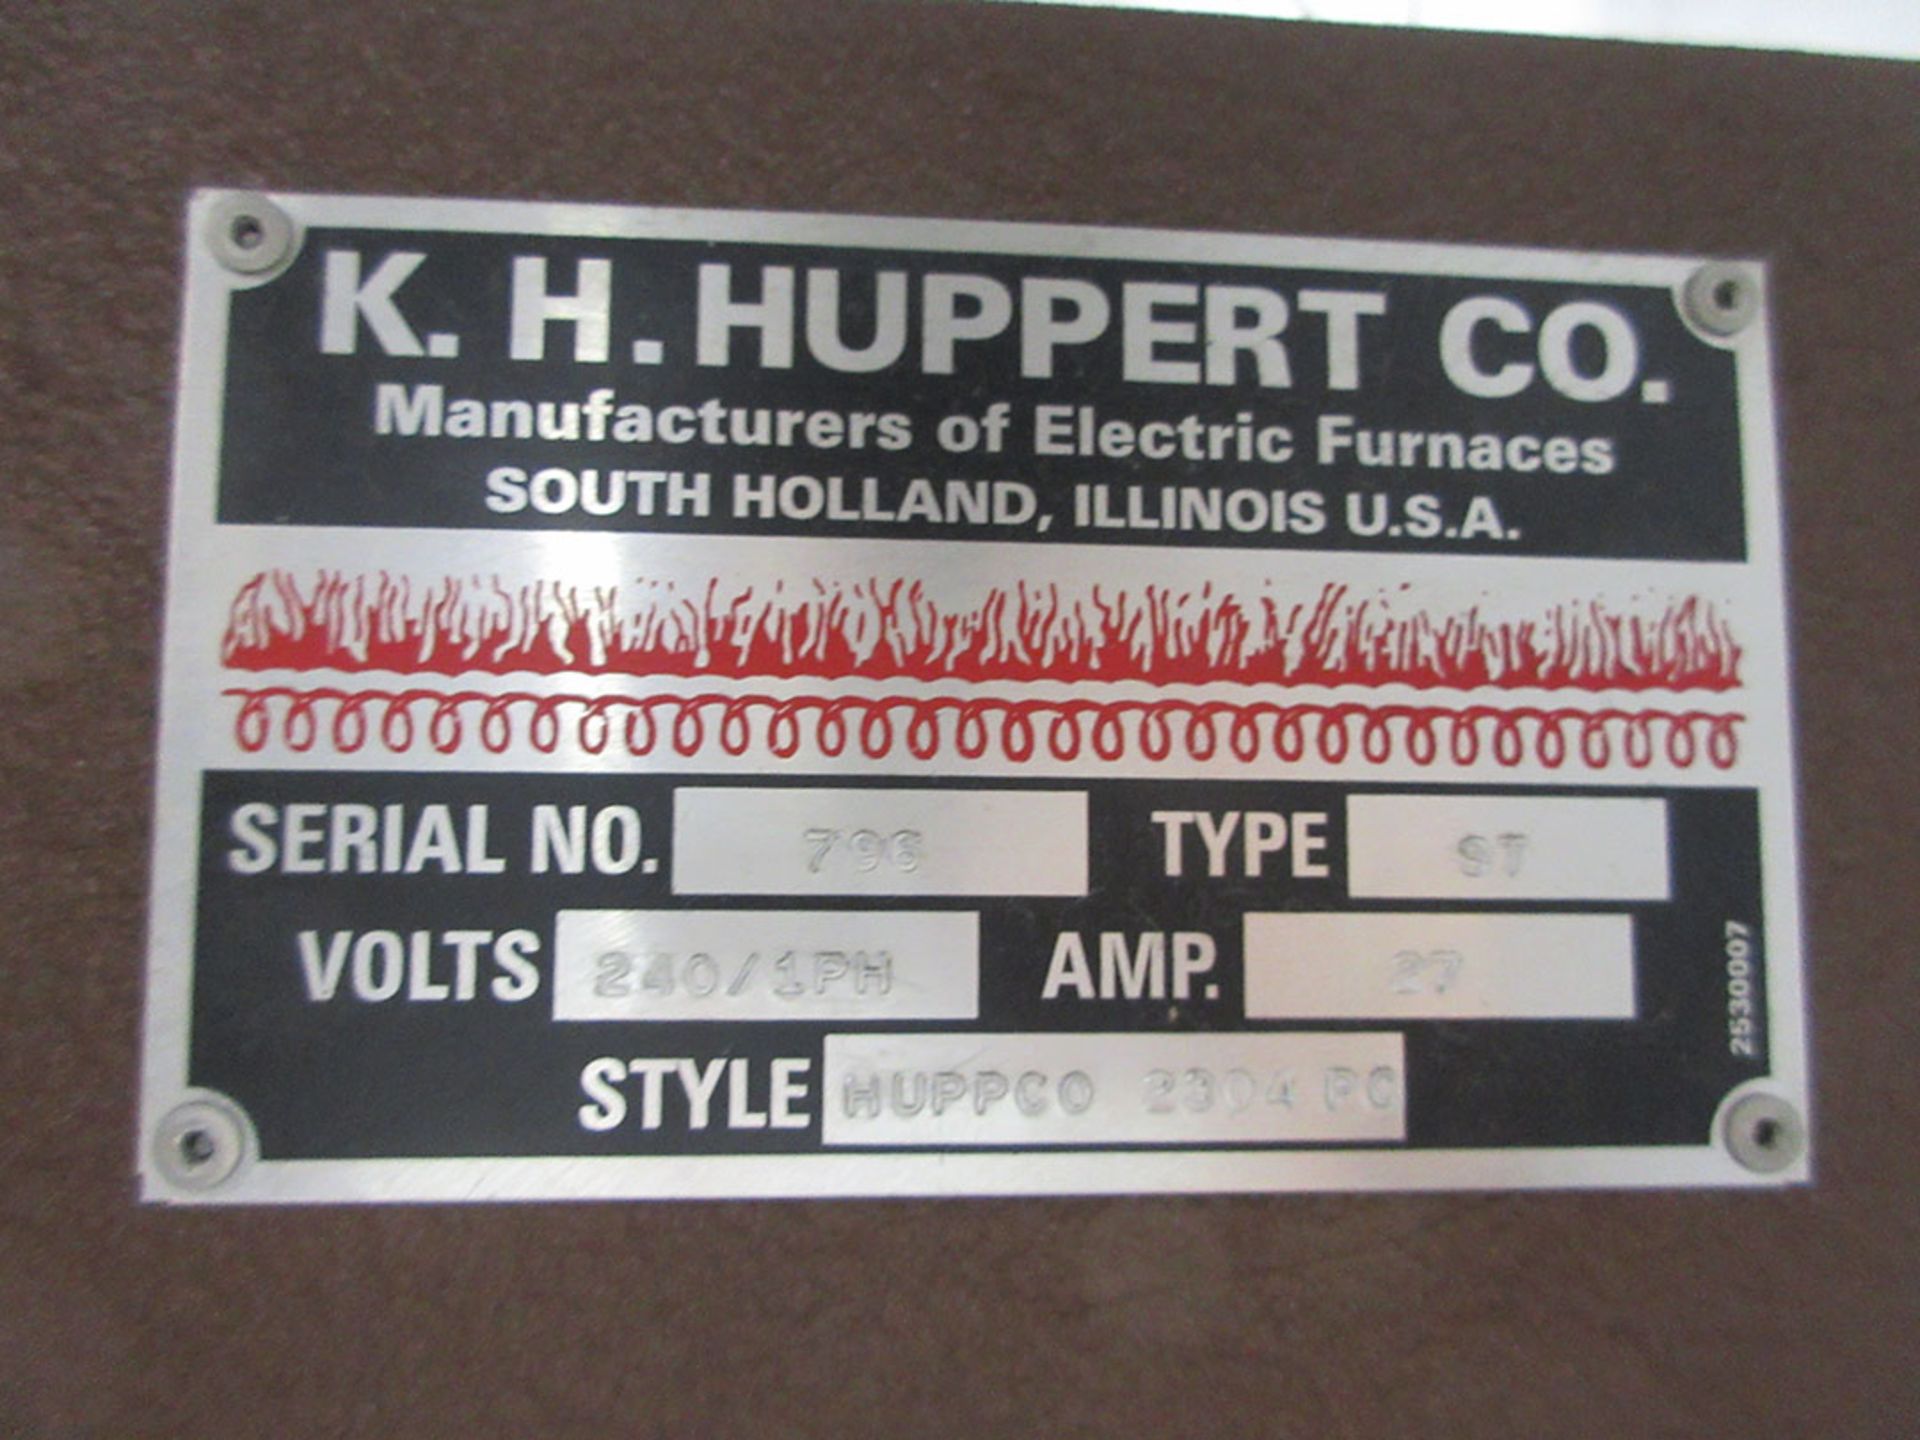 KH HUPPERT TABLETOP OVEN; TYPE ST, STYLE HUPPCO 2304PC, HONEYWELL DRO, S/N 796 ***EXCLUSIVE RIGGER - - Image 2 of 2